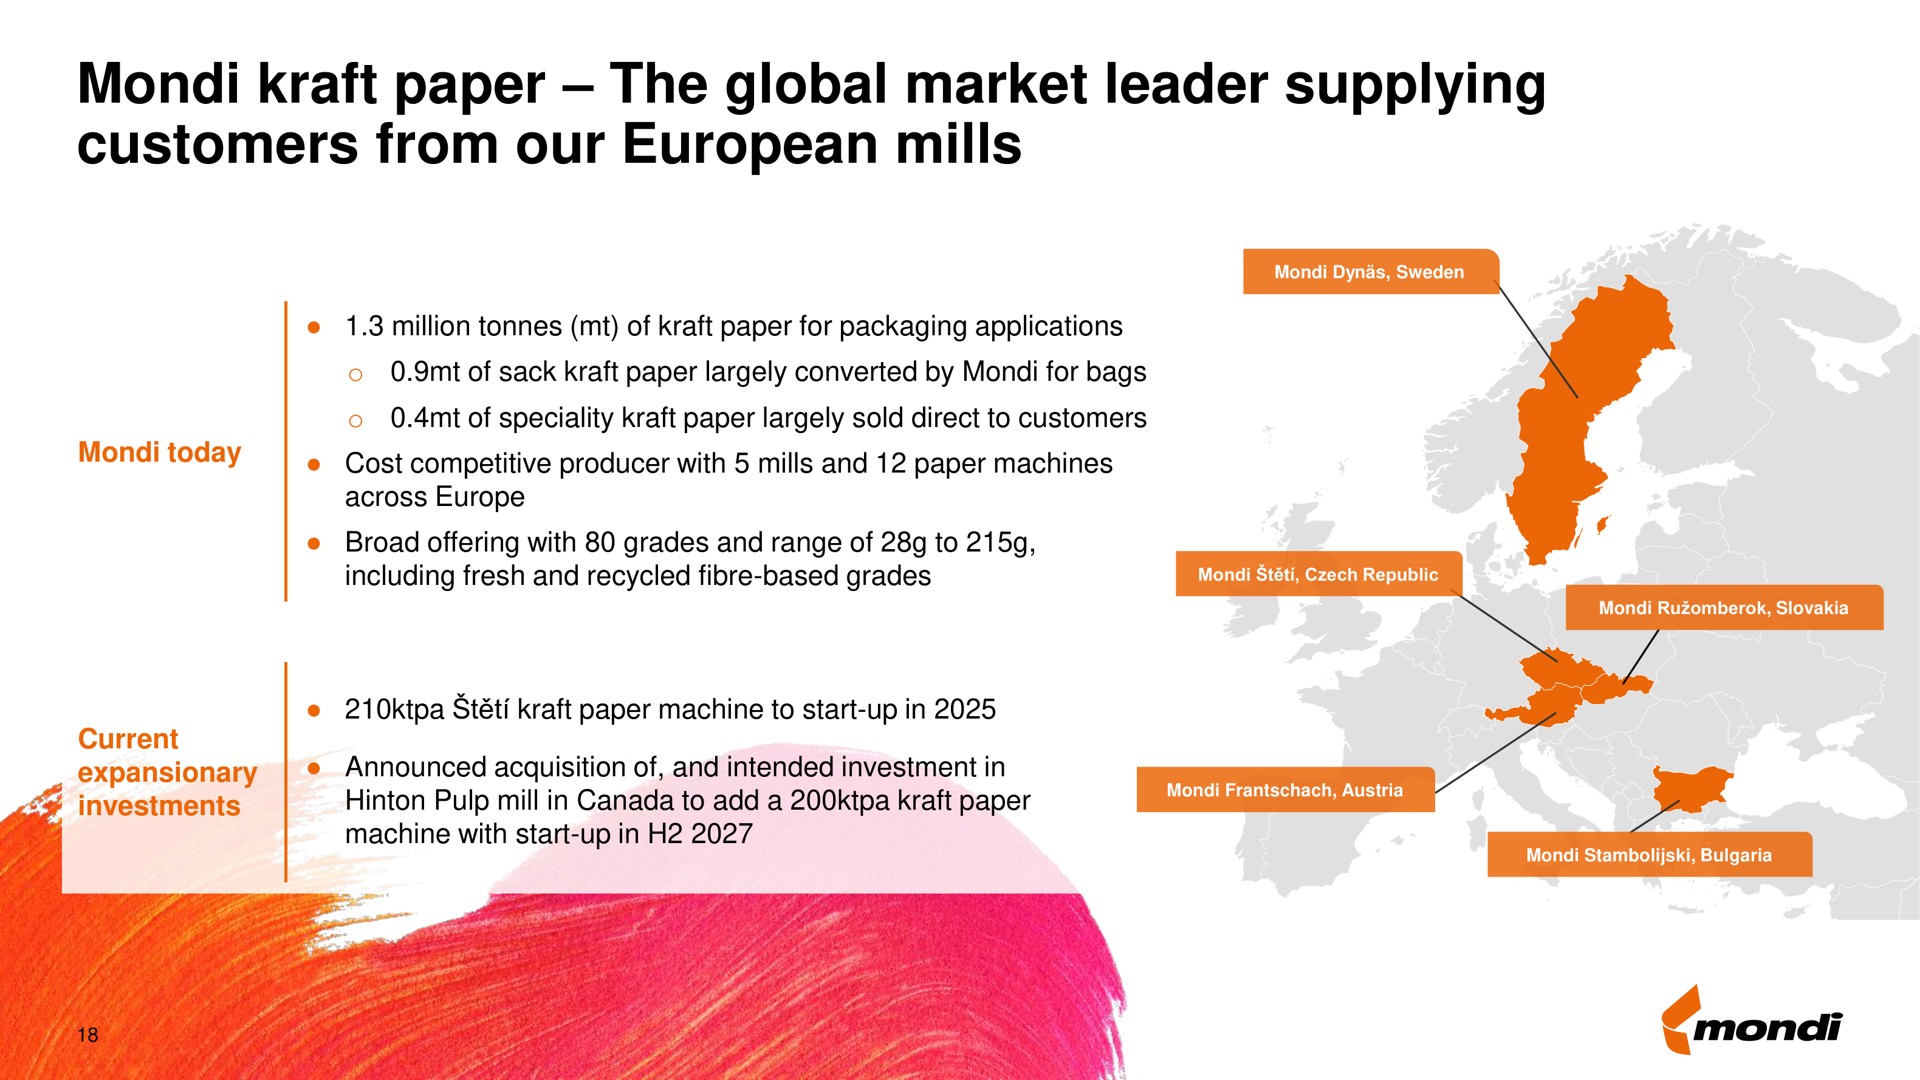 kraft paper the global market leader supplying customers from our mills | Mondi